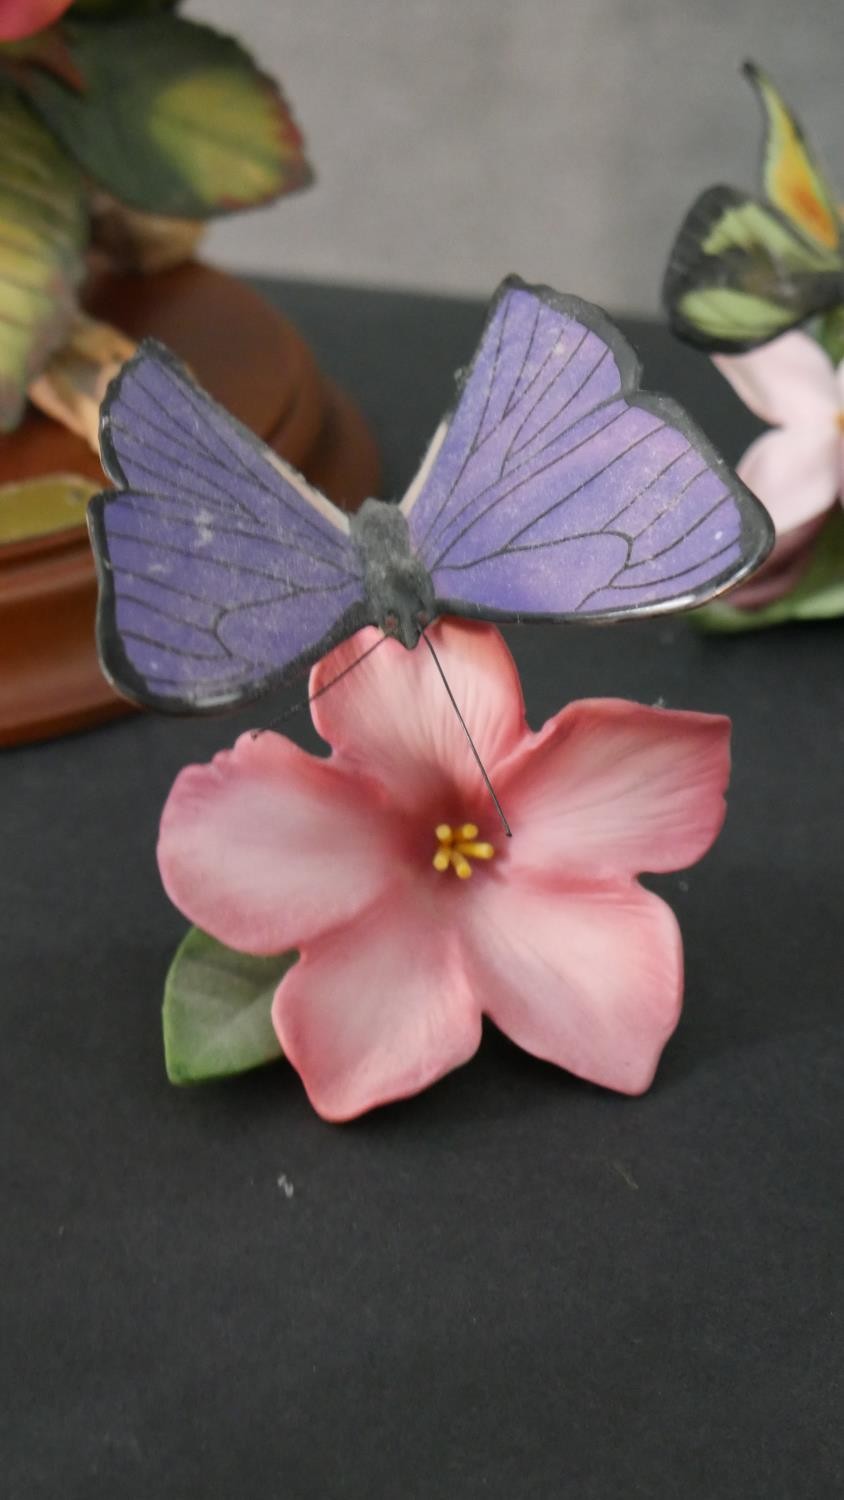 A collection of fifteen Franklin Mint 'Butterflies of the World' hand painted porcelain figures with - Image 6 of 12